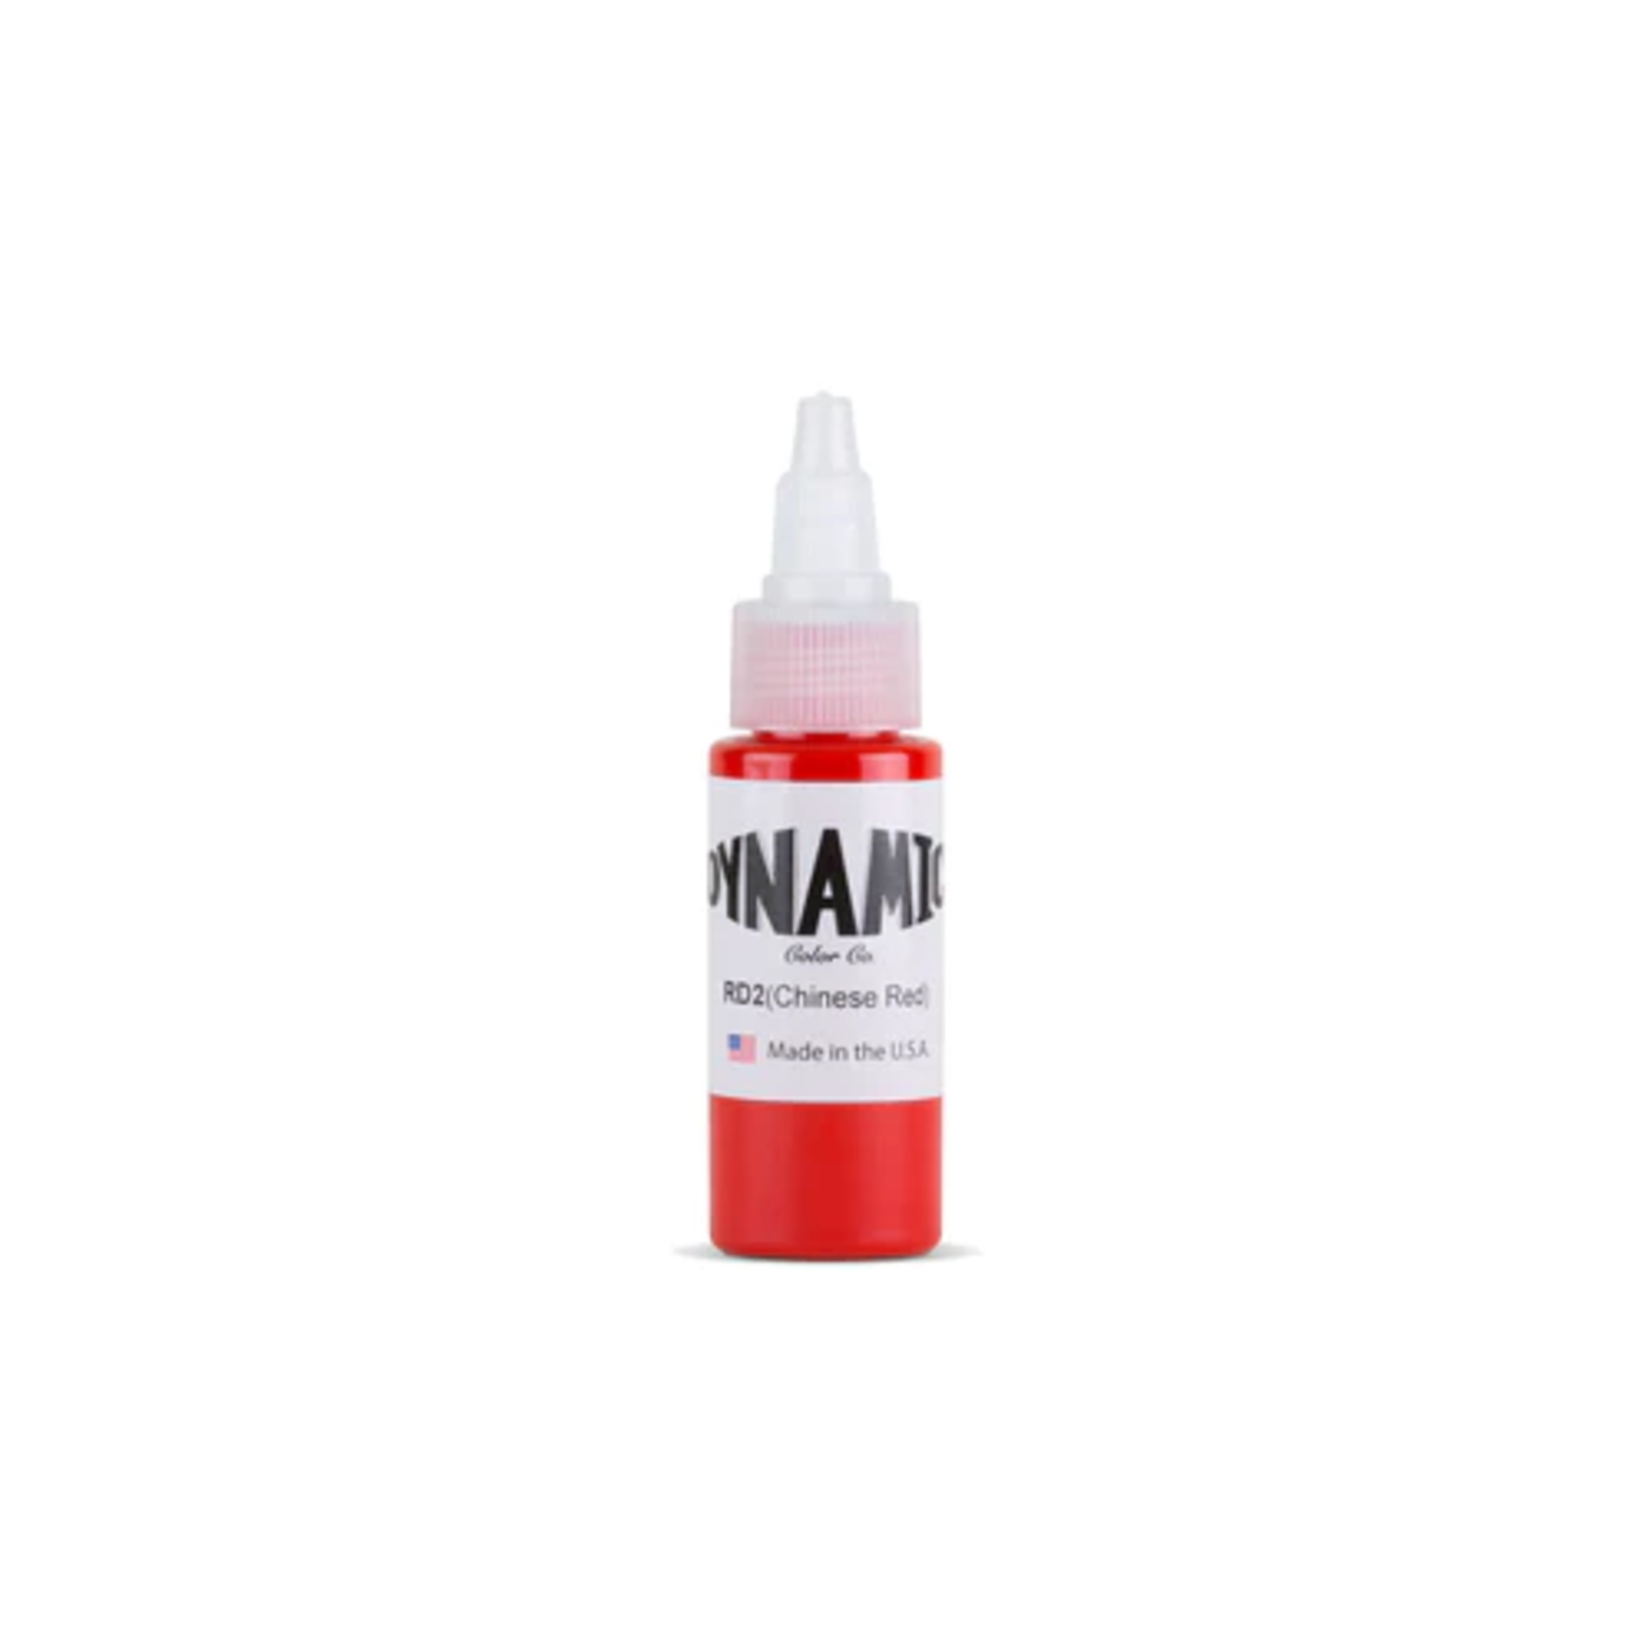 DYNAMIC INK CHINESE RED TATTOO INK - 1OZ